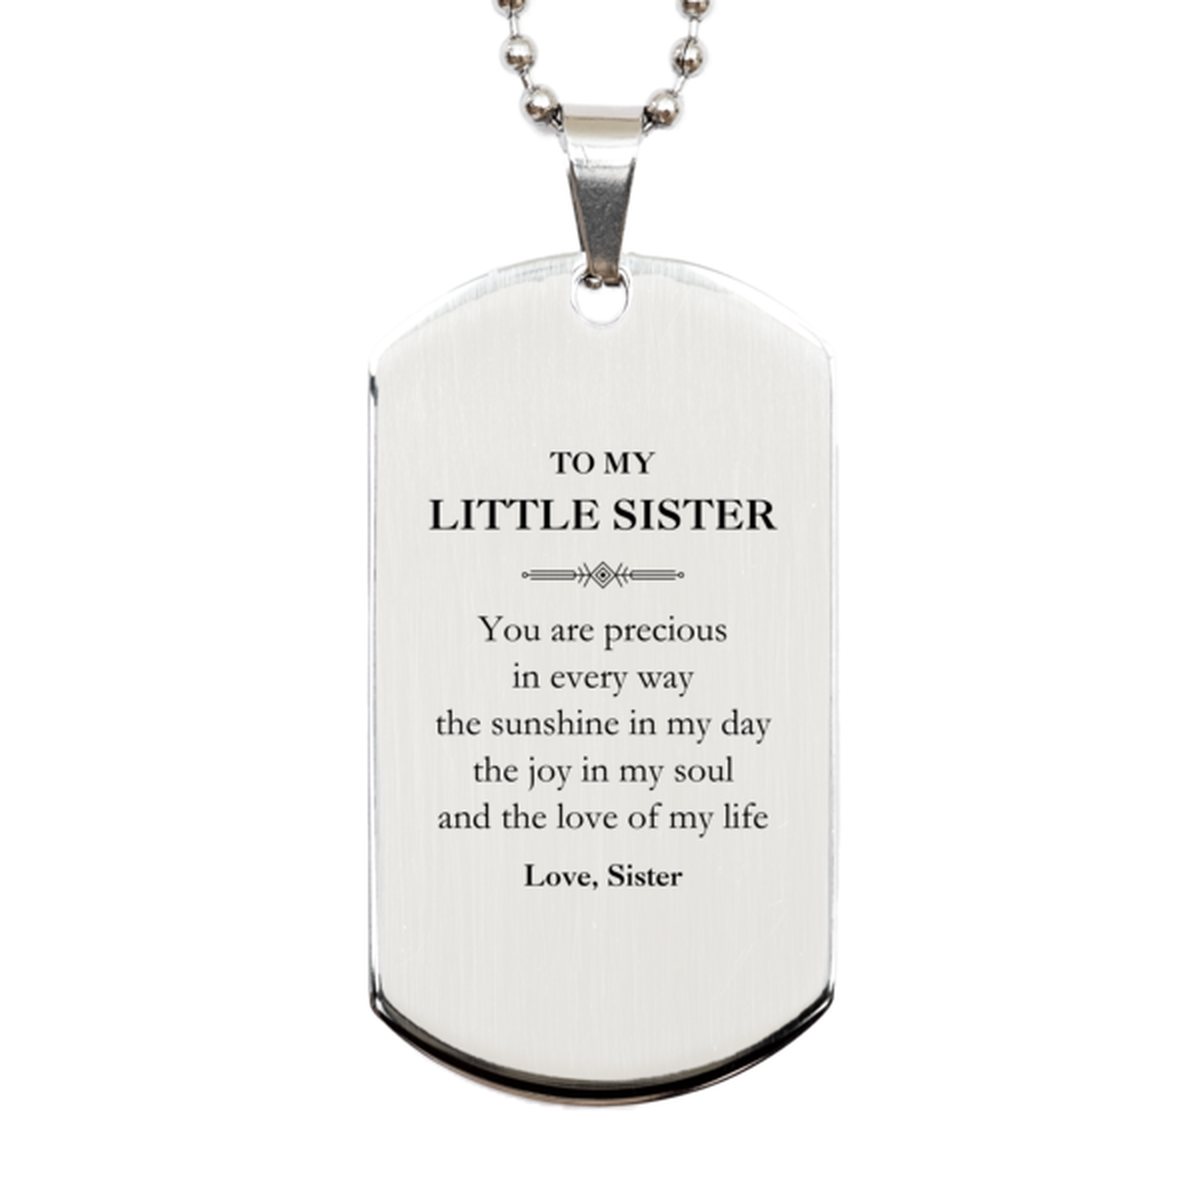 Graduation Gifts for Little Sister Silver Dog Tag Present from Sister, Christmas Little Sister Birthday Gifts Little Sister You are precious in every way the sunshine in my day. Love, Sister